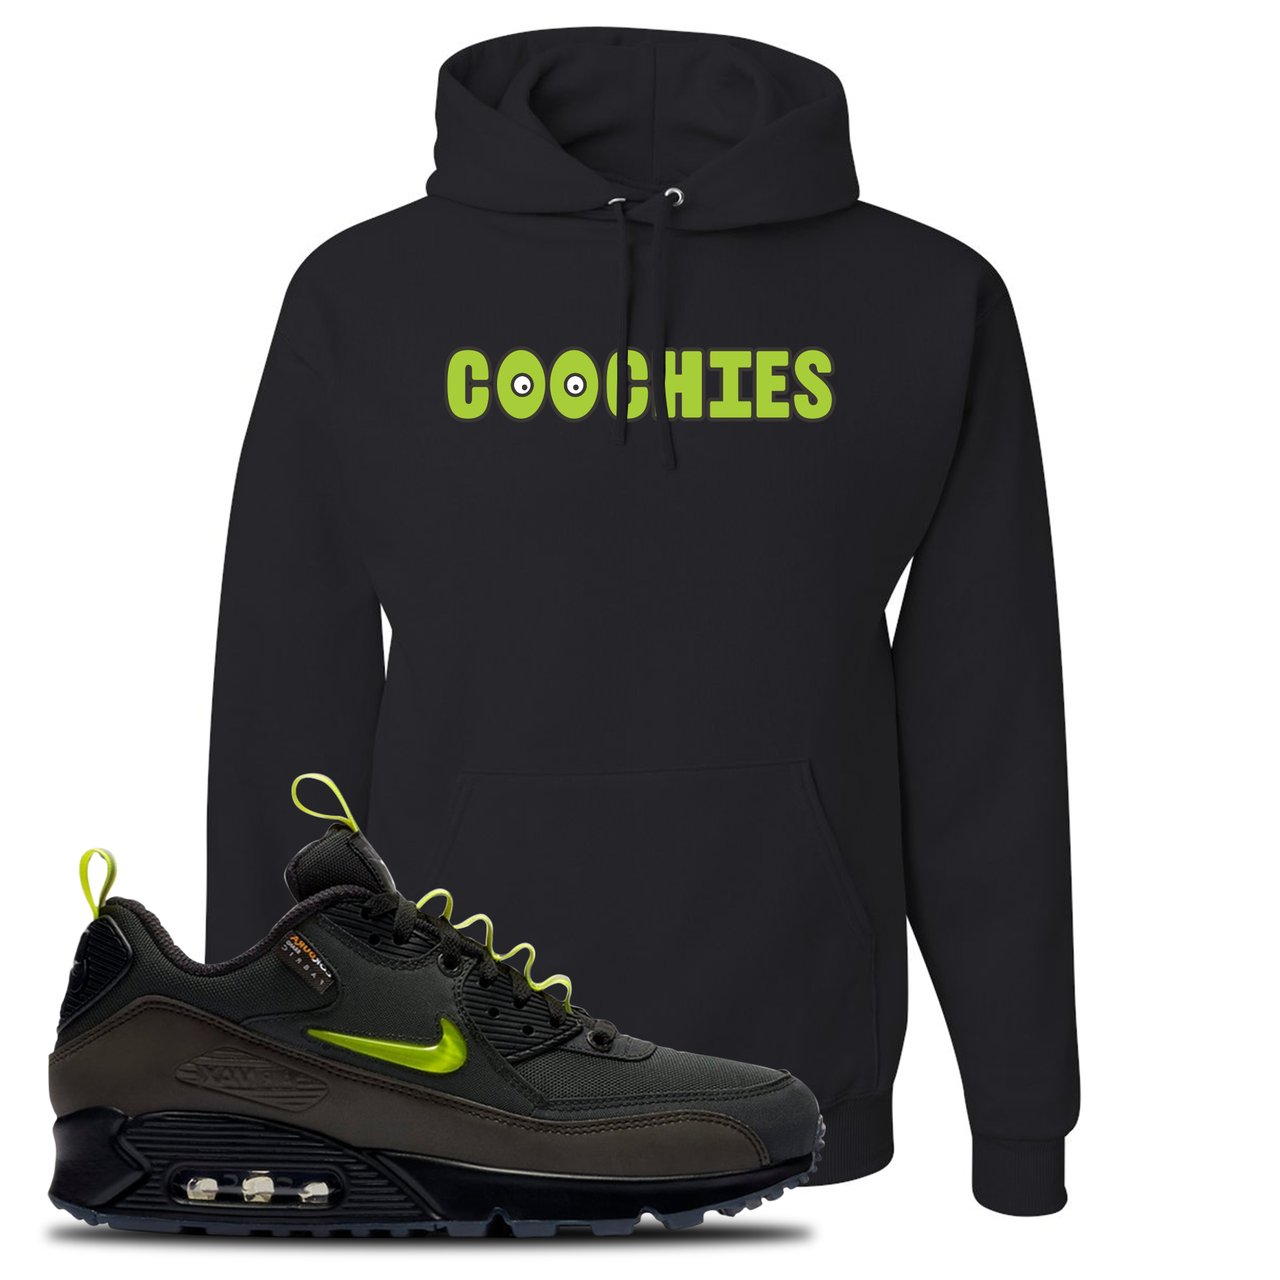 The Basement X Air Max 90 Manchester Coochies Black Sneaker Hook Up Pullover Hoodie